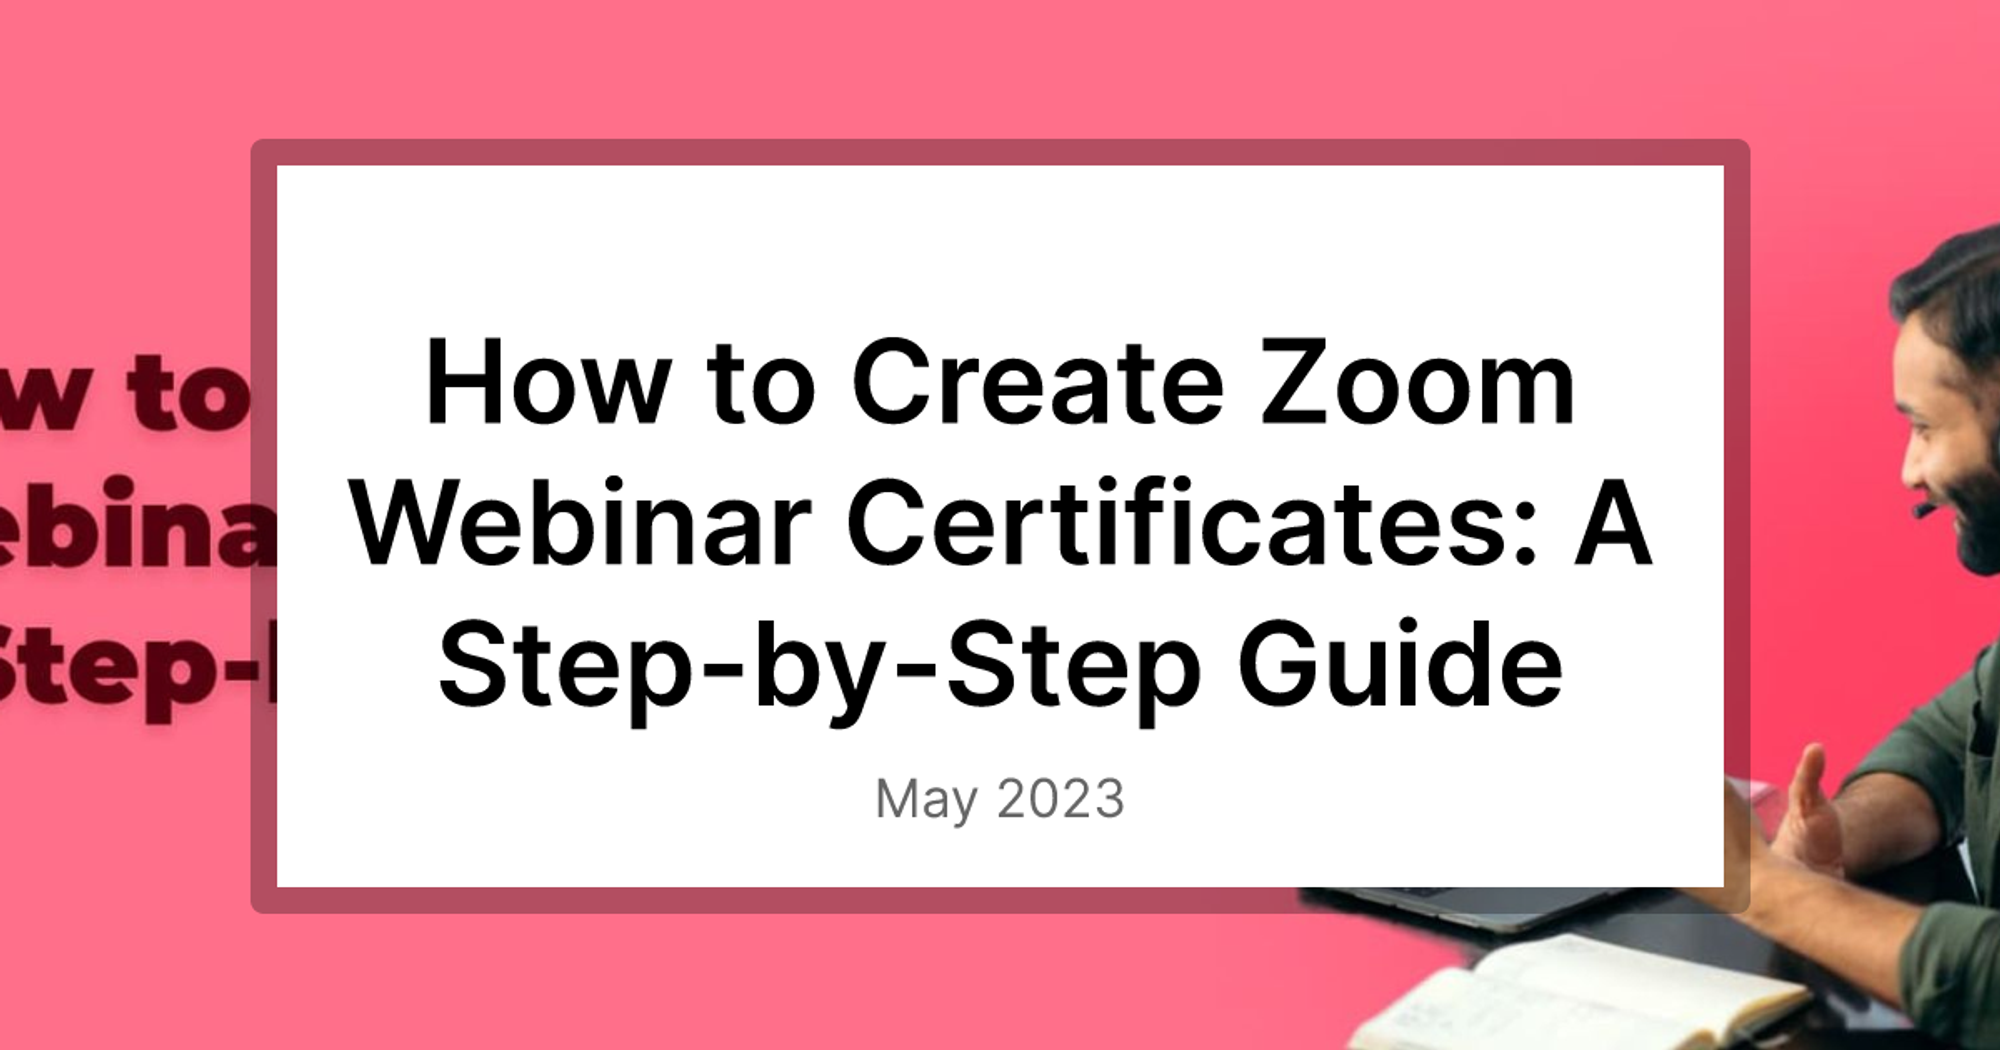 How to Generate Certificates for Zoom Meetings and Webinars: A Complete Guide